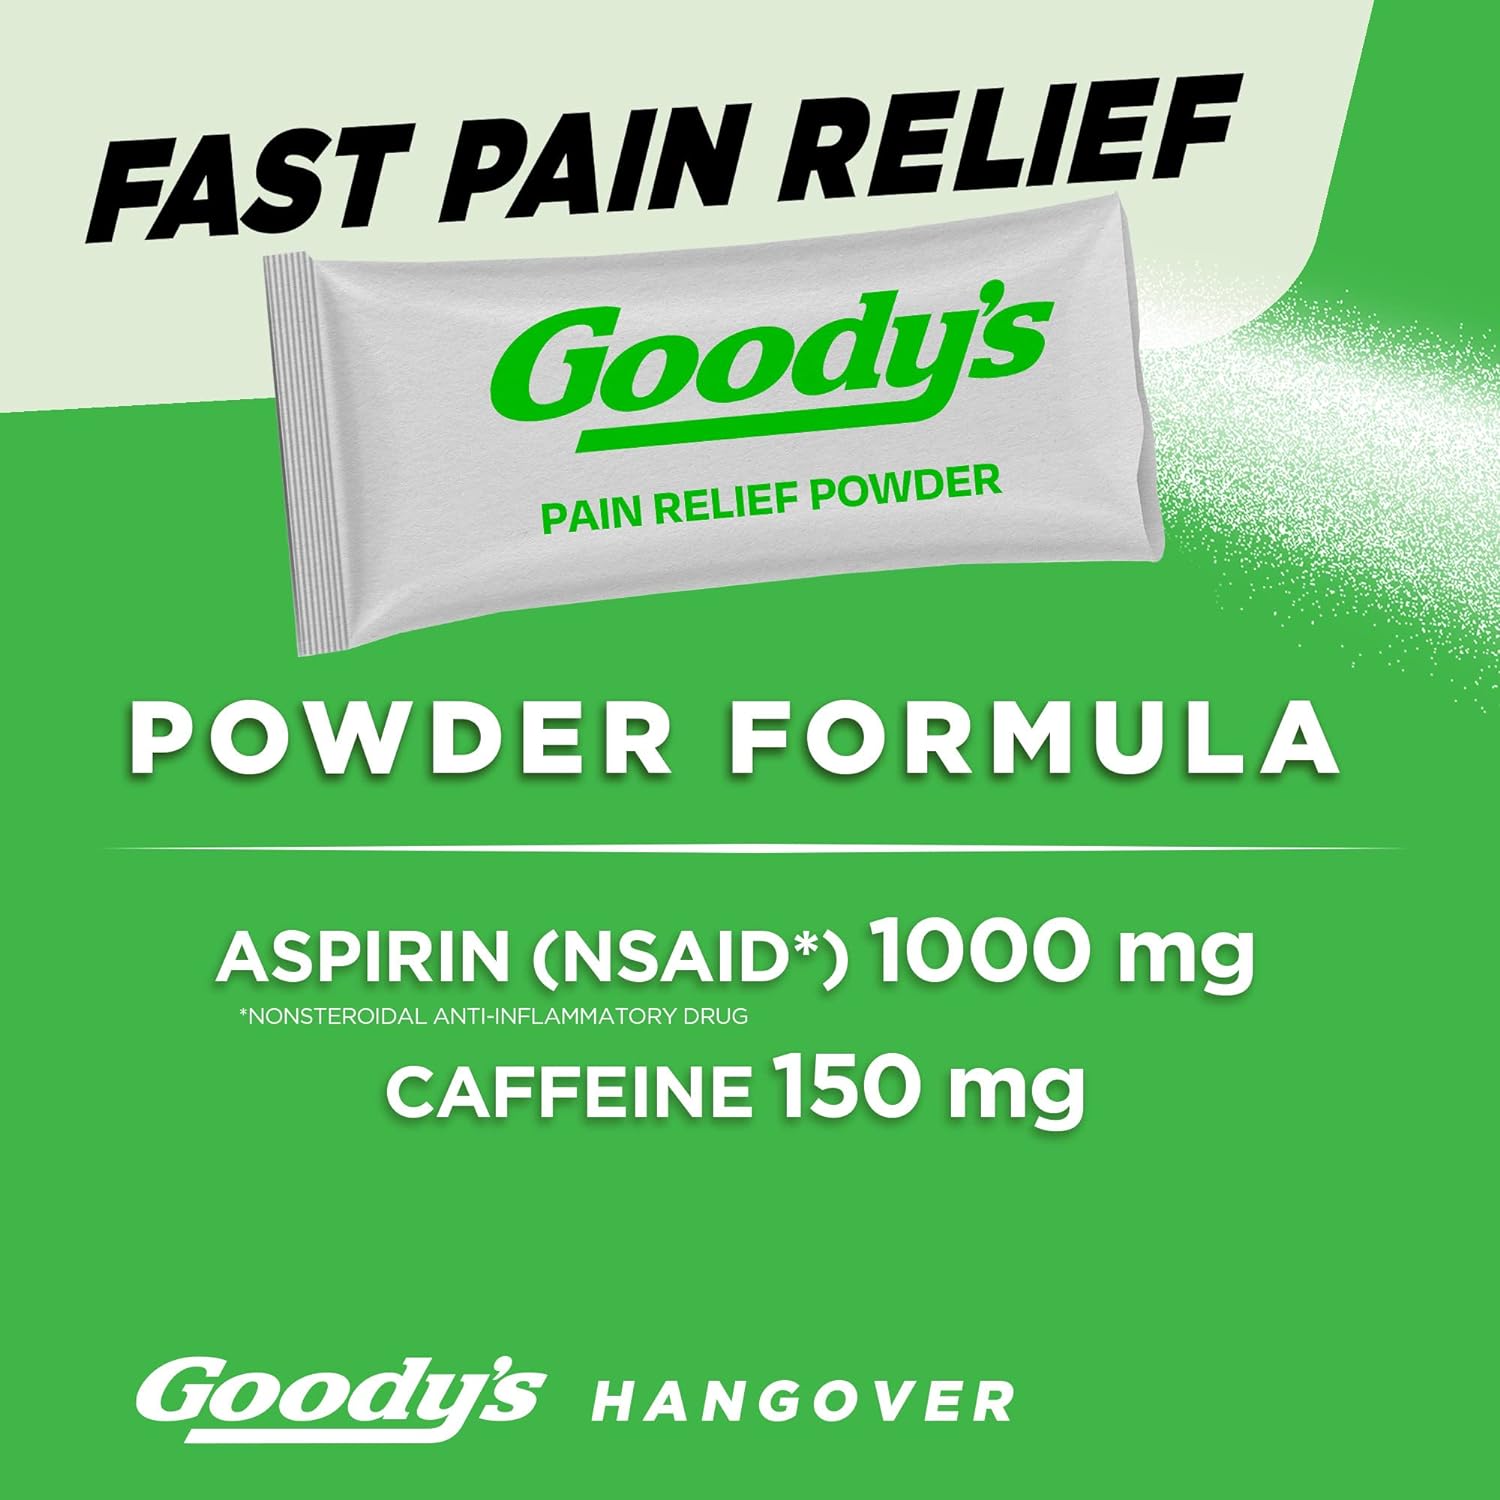 Goody's Hangover Powders, Fast Pain Relief, Berry Citrus Flavor, 4 Stick Powders, 6 Pack : Health & Household